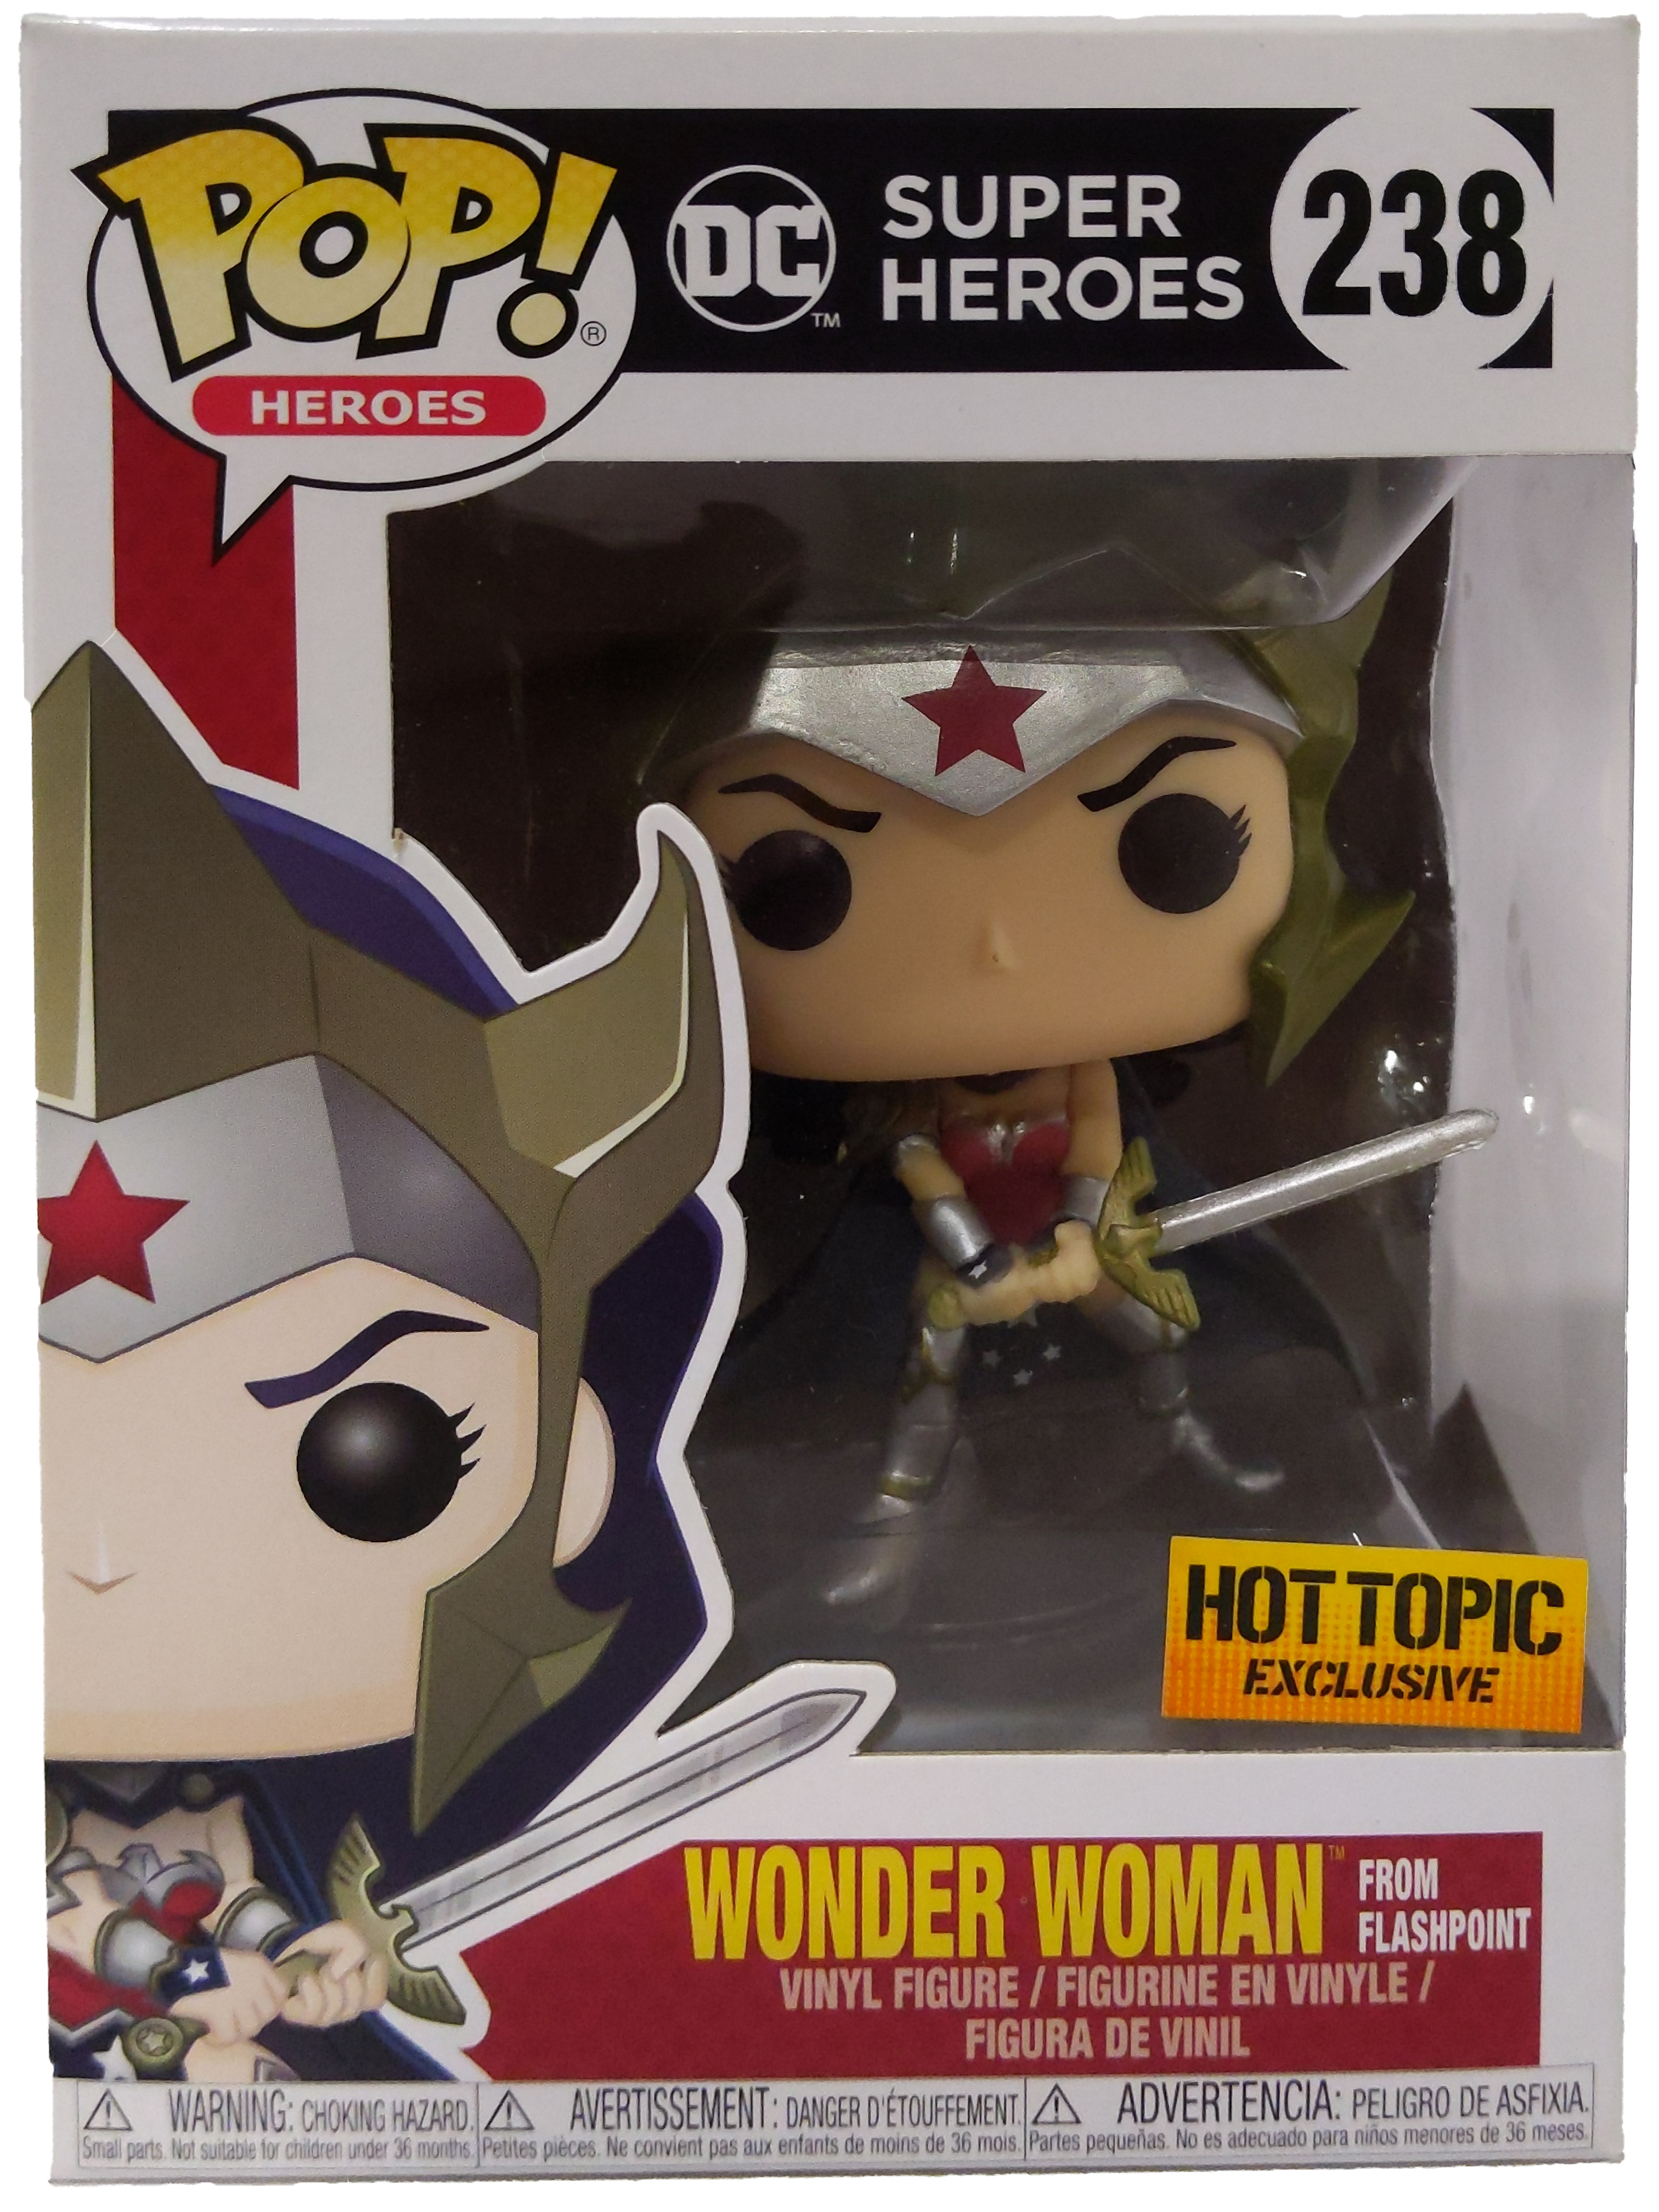 Funko Pop! Heroes DC Super Heroes Wonder Woman From Flashpoint Hot